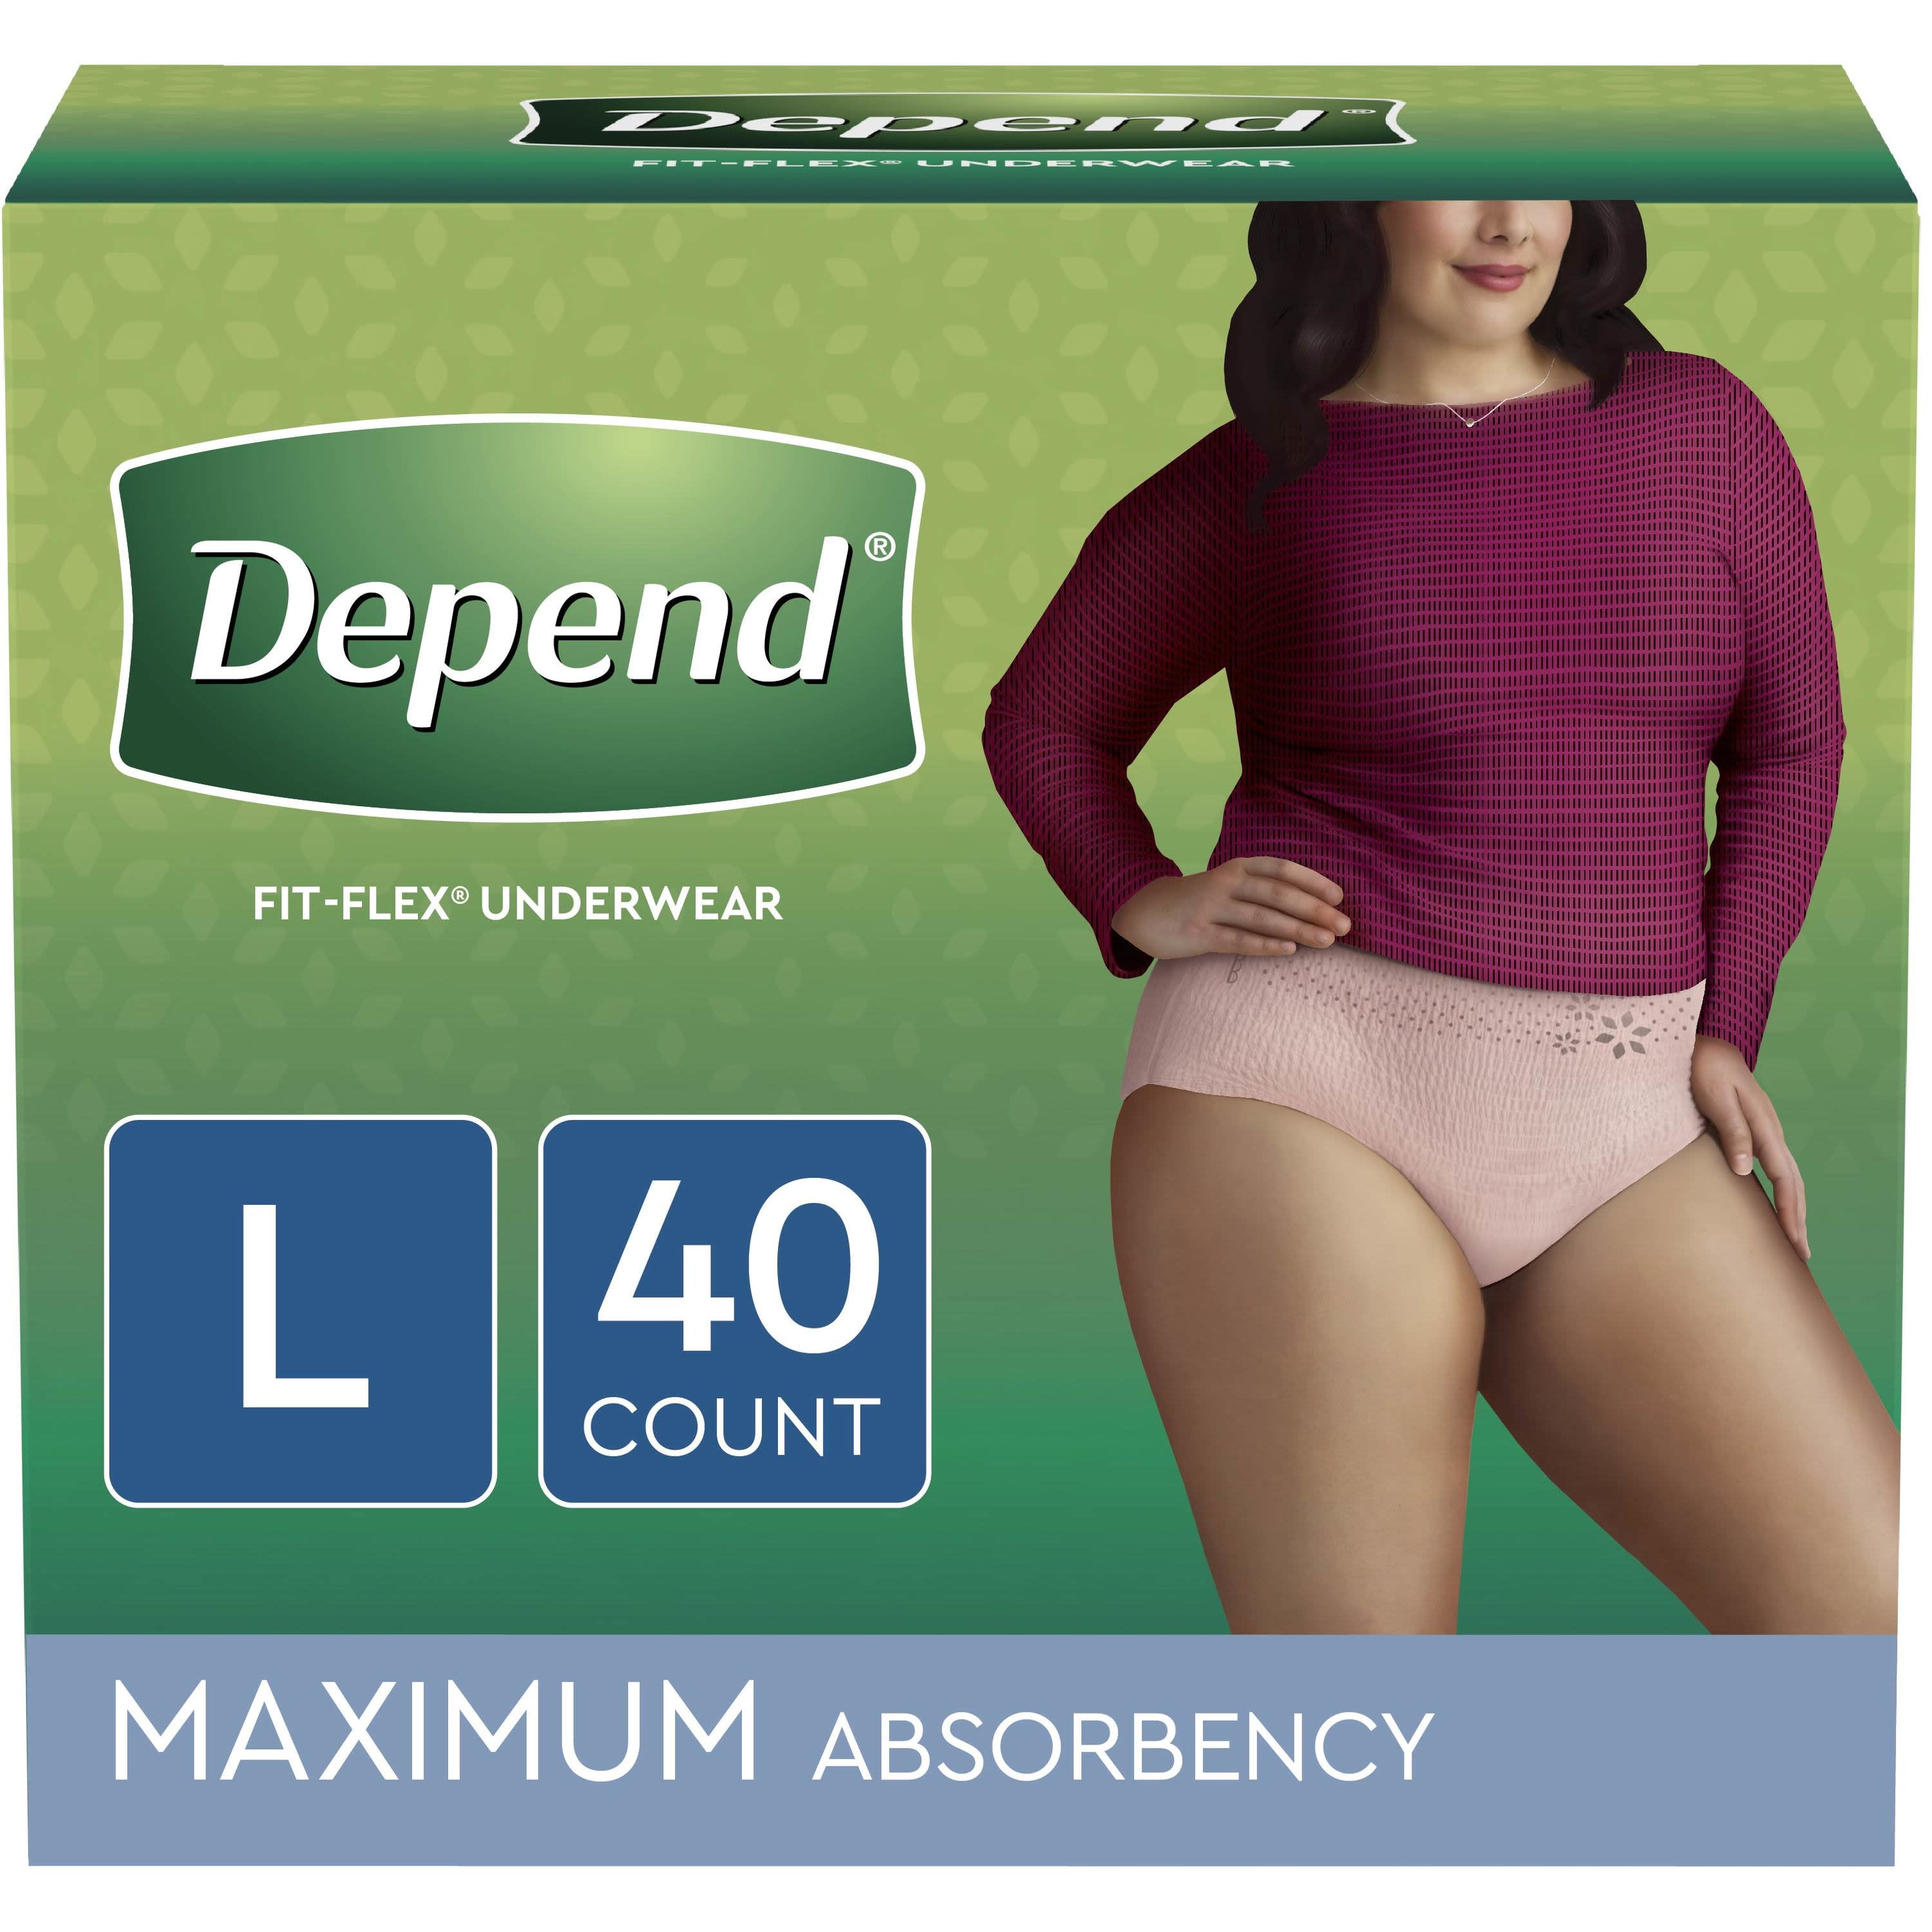 Depend Fit-Flex Incontinence Underwear for Women, Maximum Absorbency, Large,  Light Pink, 40 Count (Pack of 2